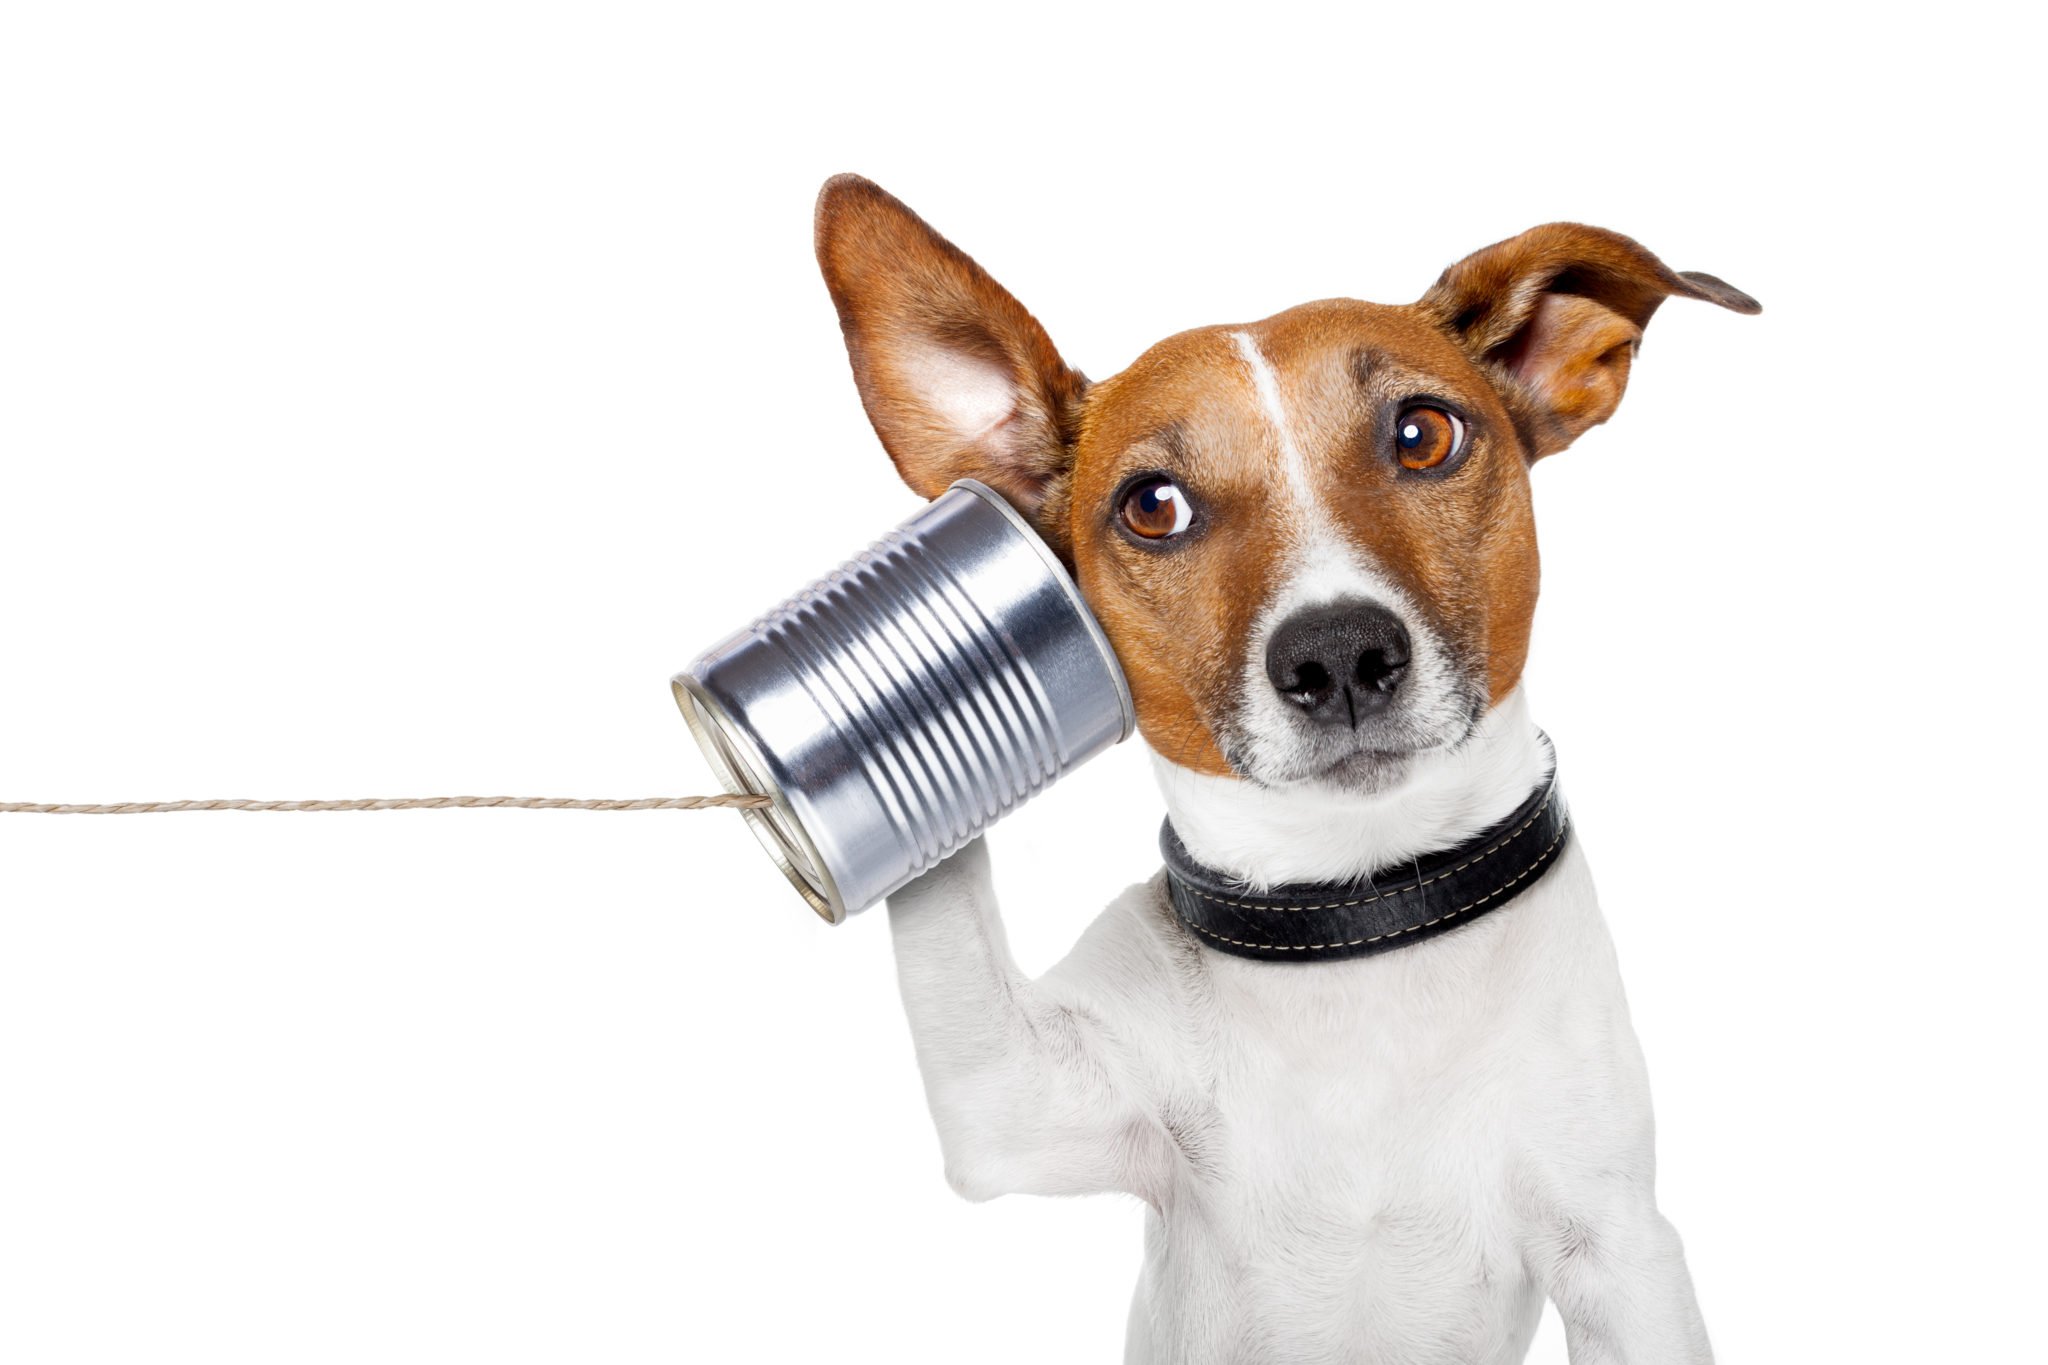 Dog on the phone image via Shutterstock. 